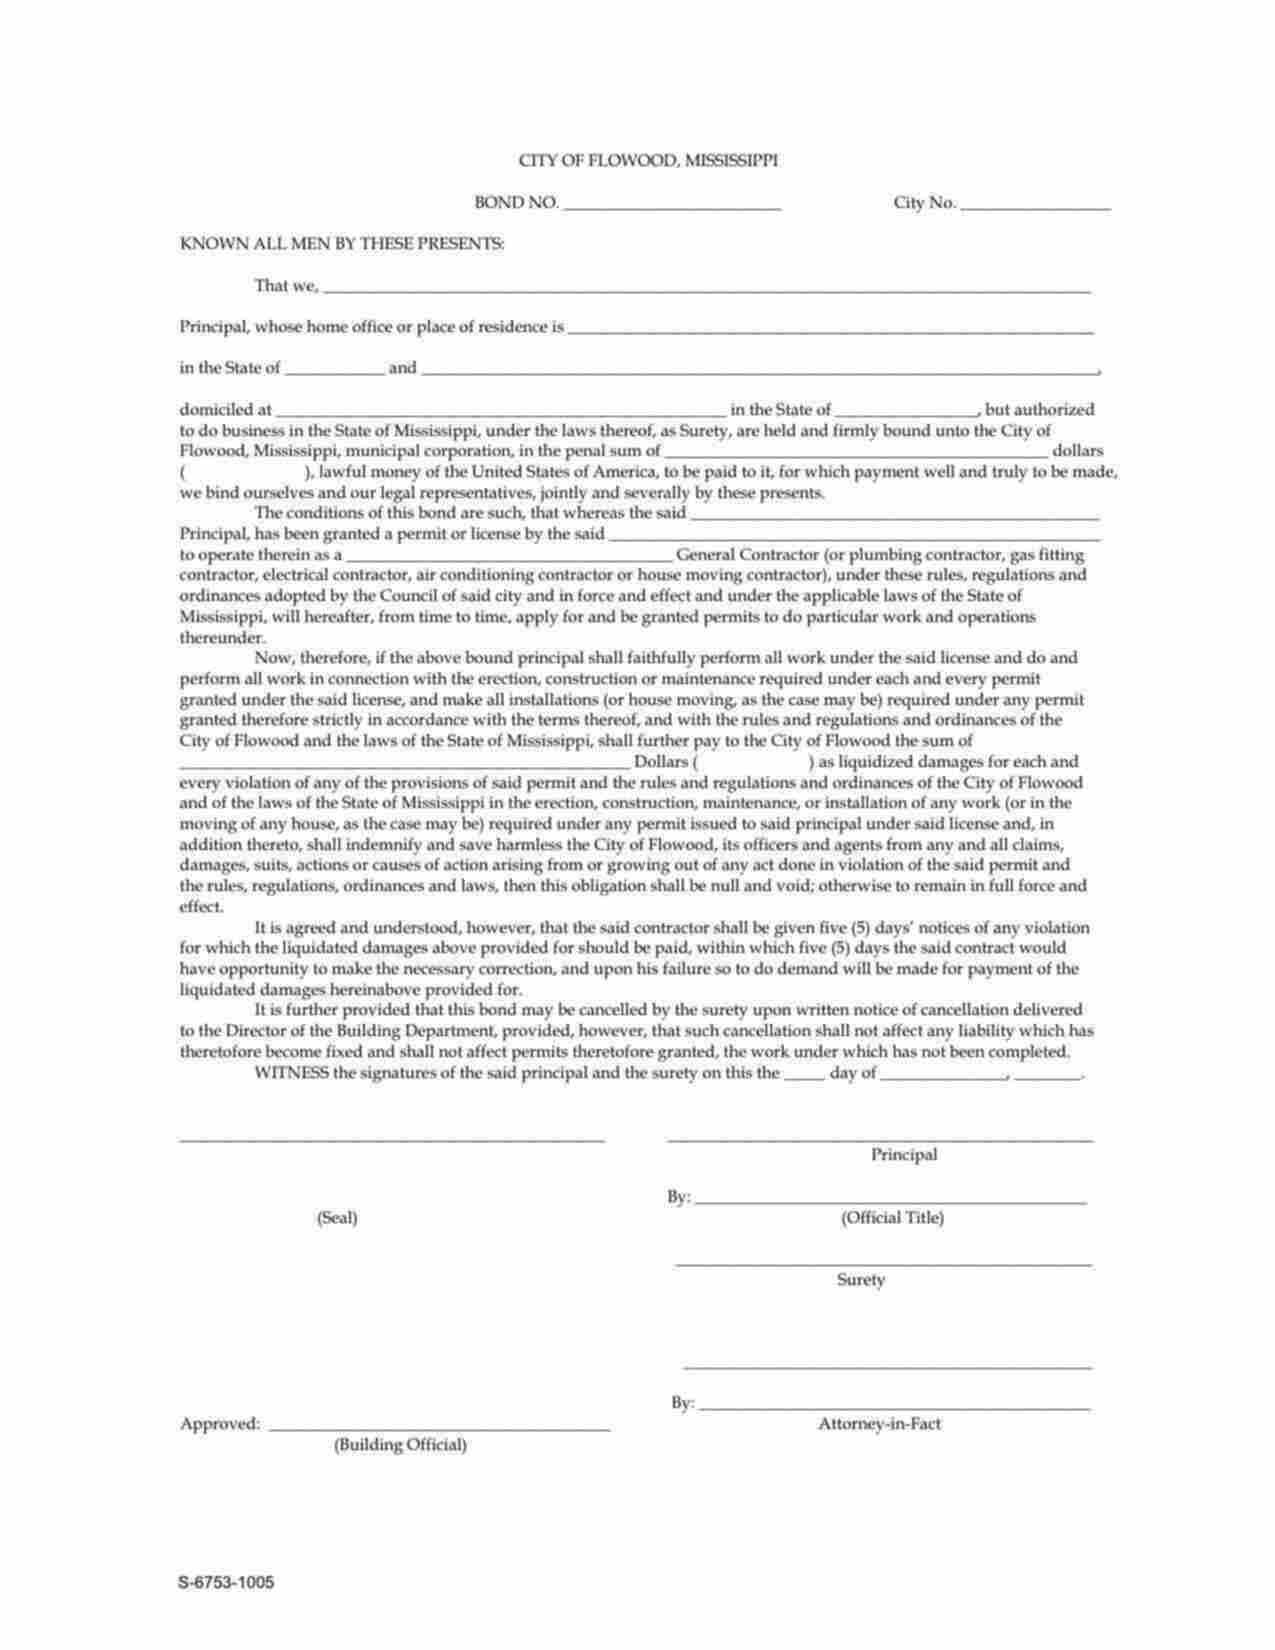 Mississippi Gas Fitting Contractor Bond Form